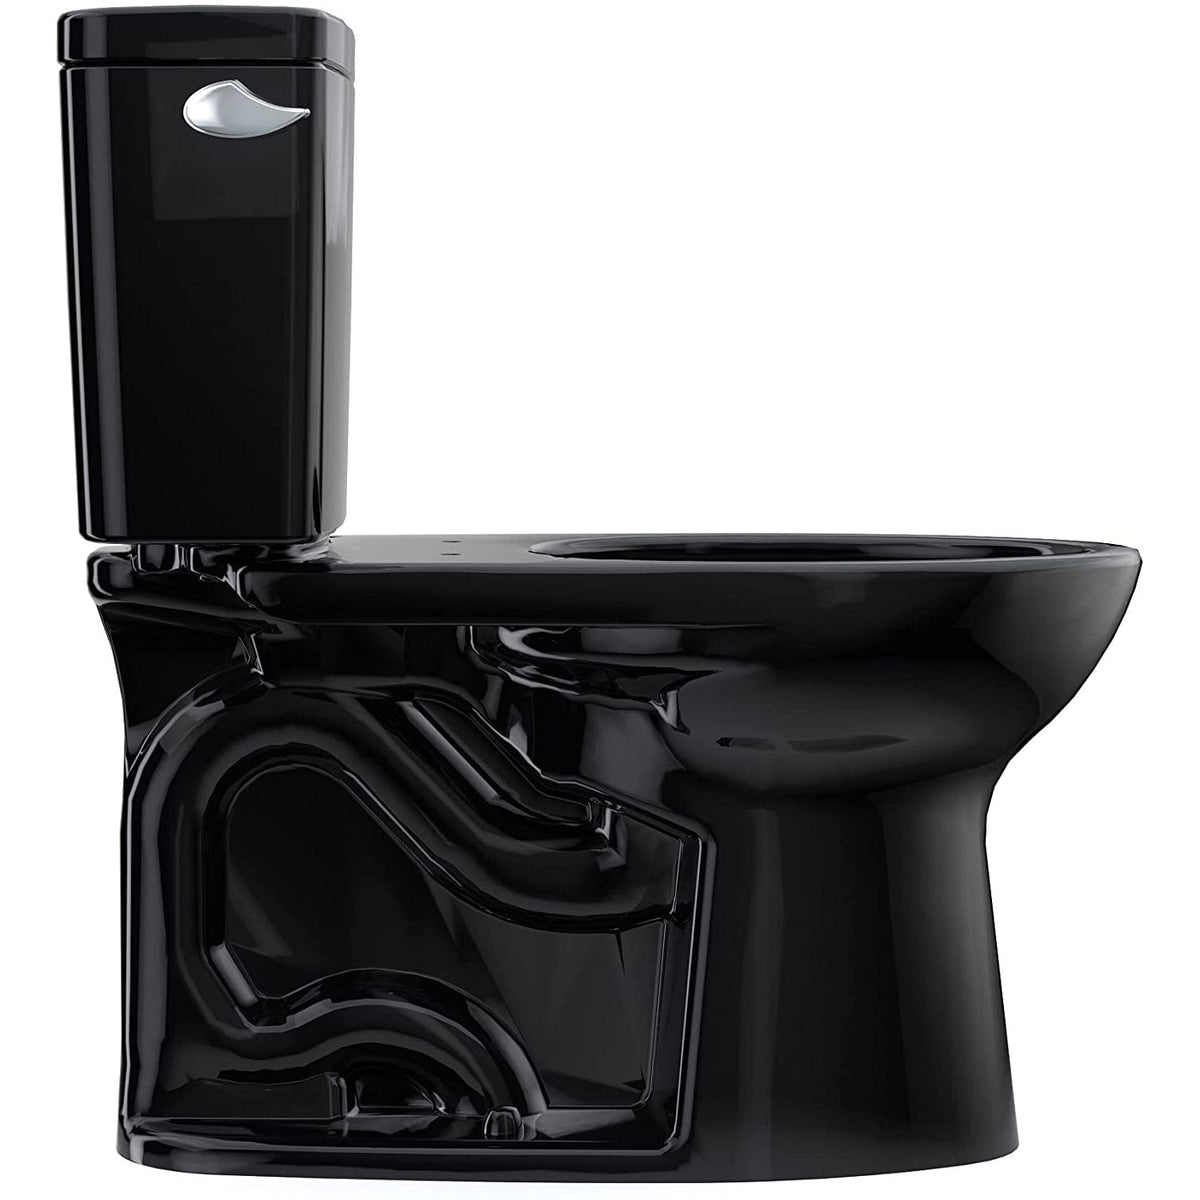 TOTO CST776CSF#51 Drake 2-Piece Elongated 1.6GPF Toilet in Black